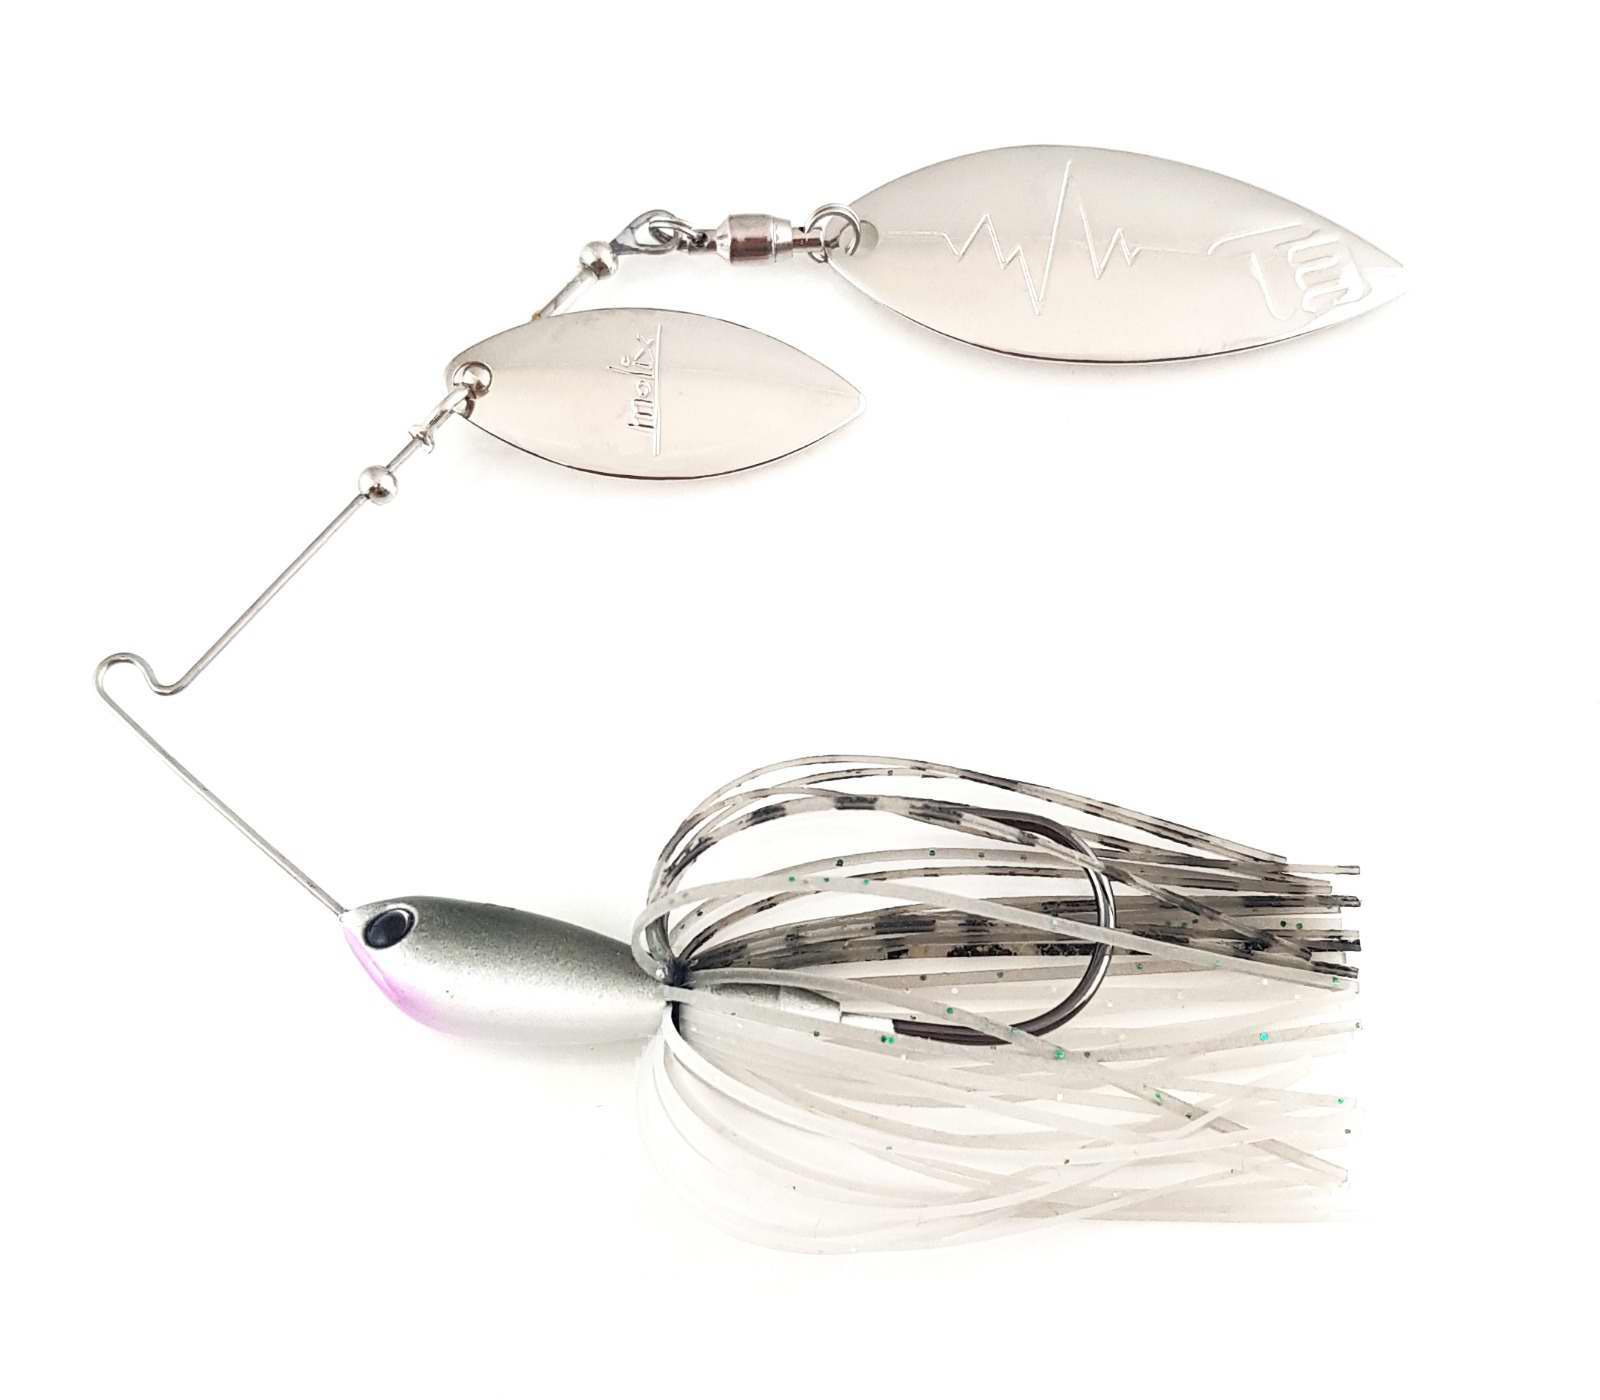 OUT/OUT_ARTICOLI/areapesca.it_AP01301.3916.3914_t3-custom-spinnerbait-38-oz---10-gr-s04---shiner-shad.jpg